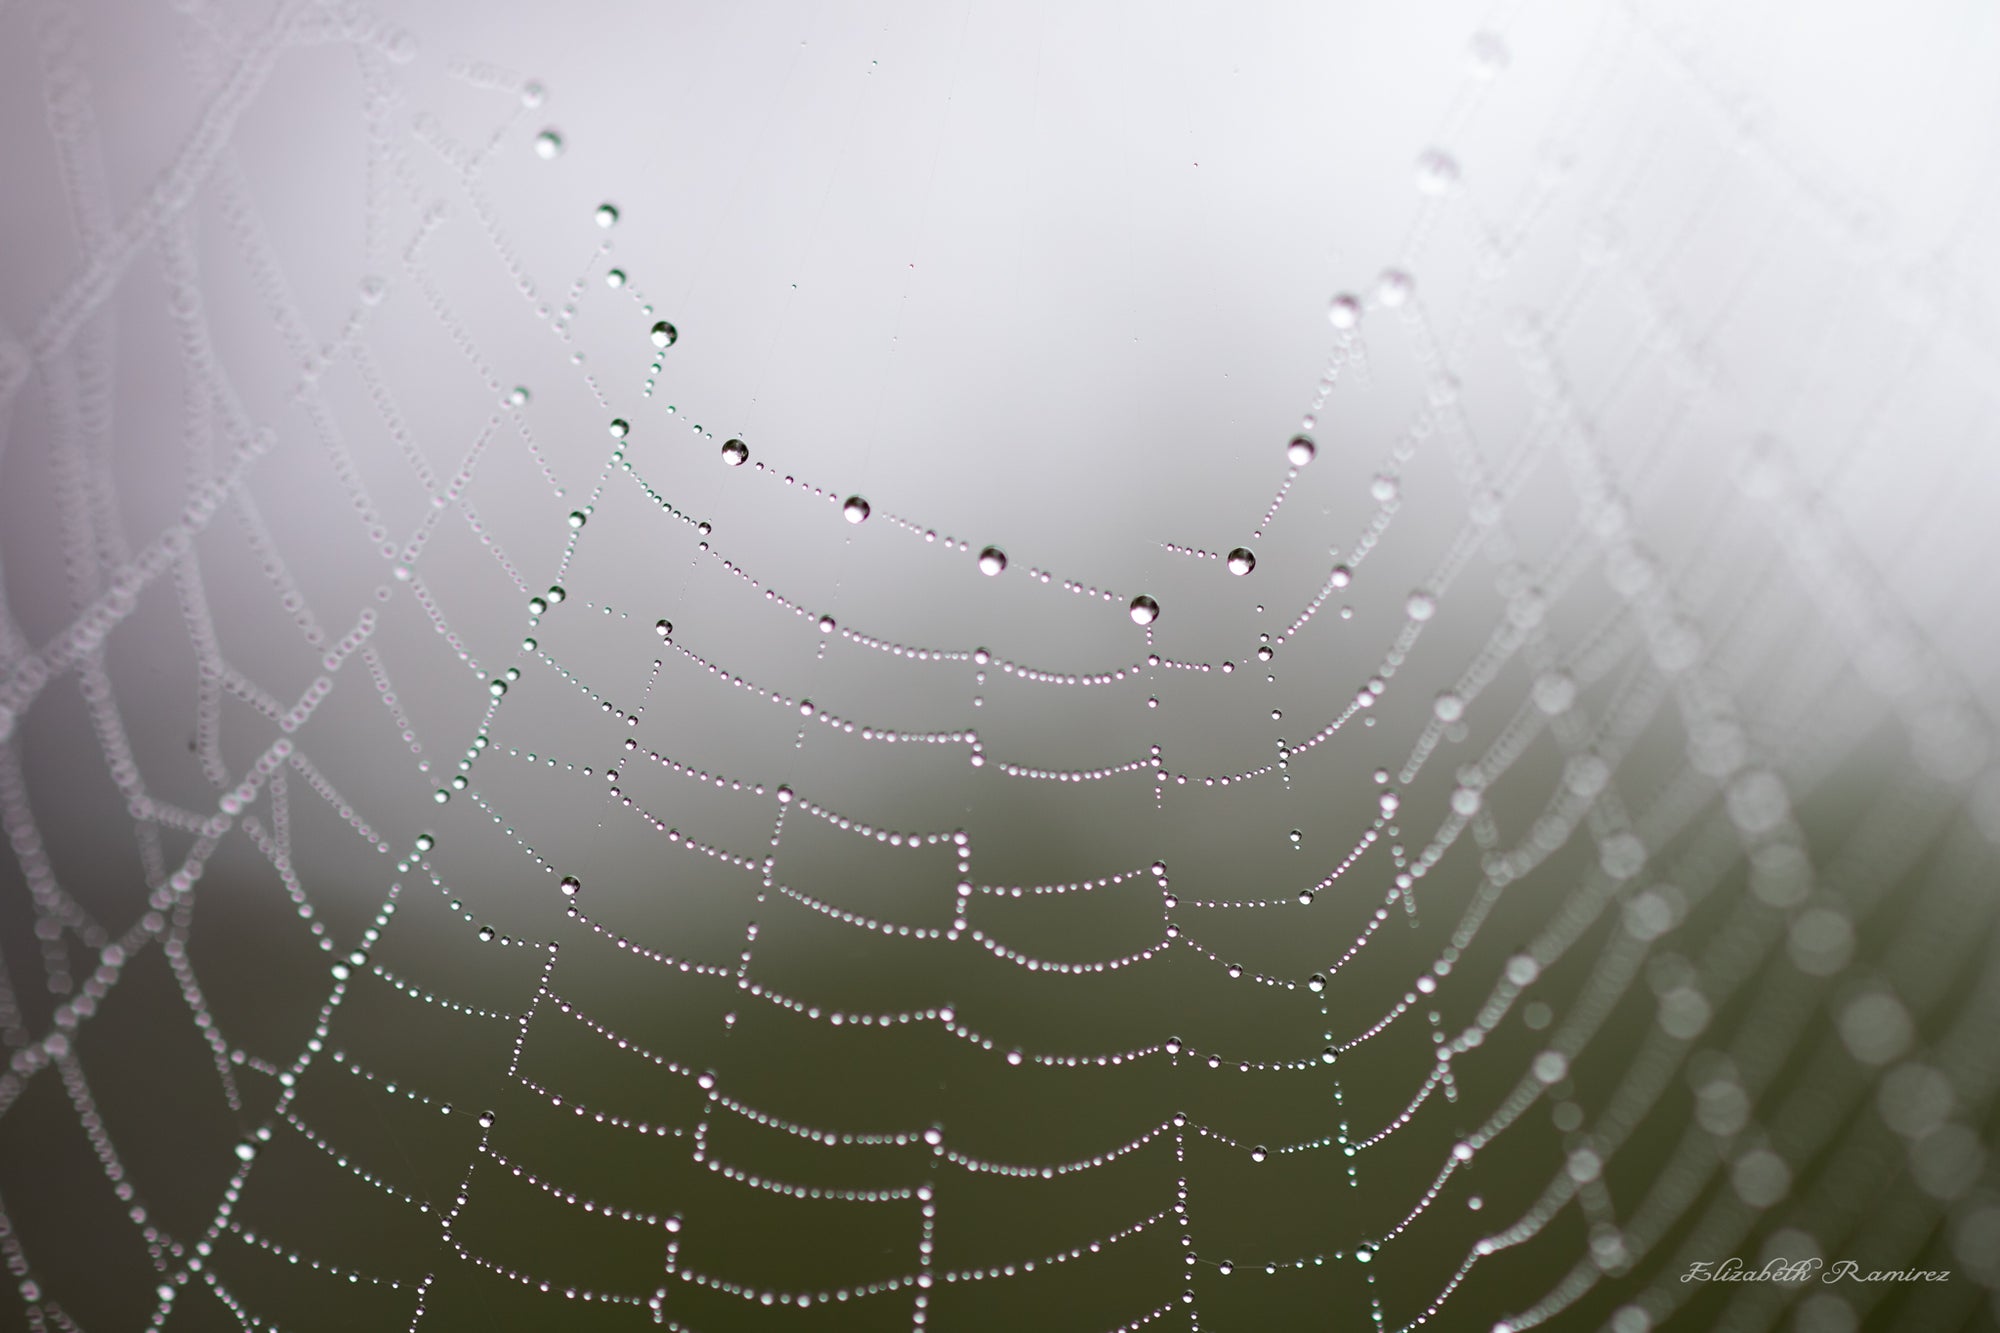 "Dew Drops On a Spiderweb" Prints and Products